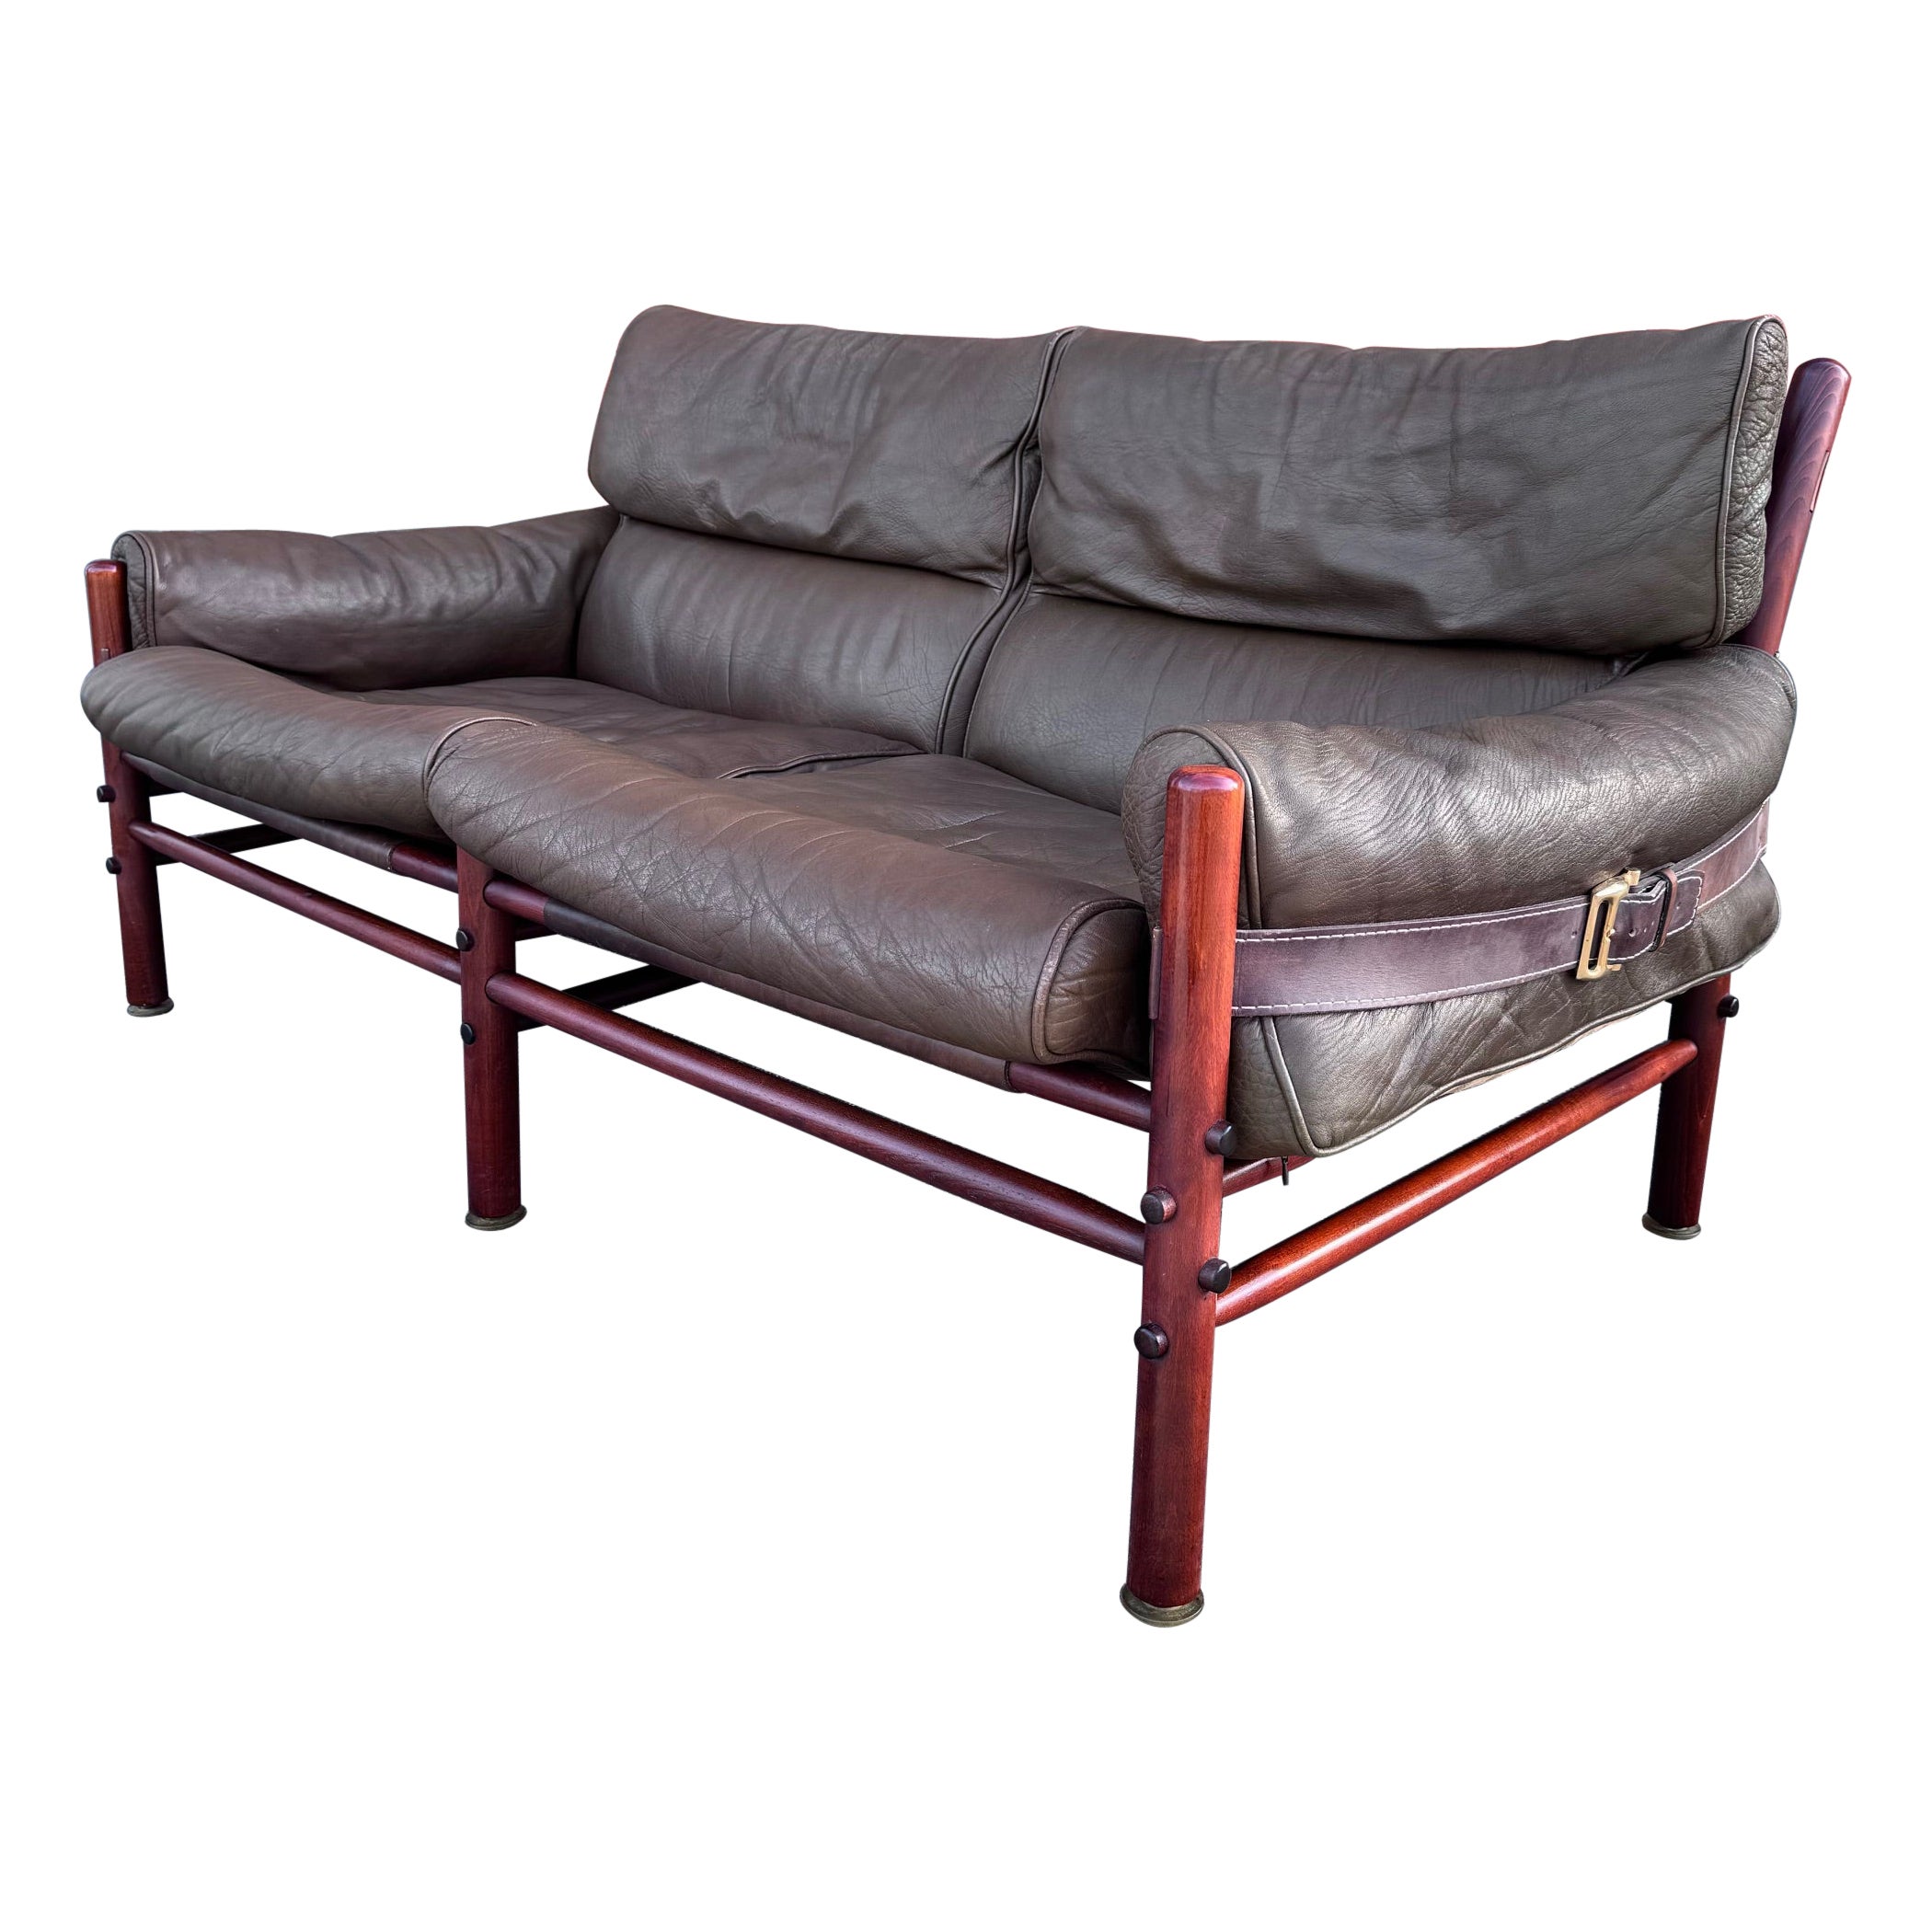 Rare 2-seated sofa "Kontiki" by Arne Norell For Sale